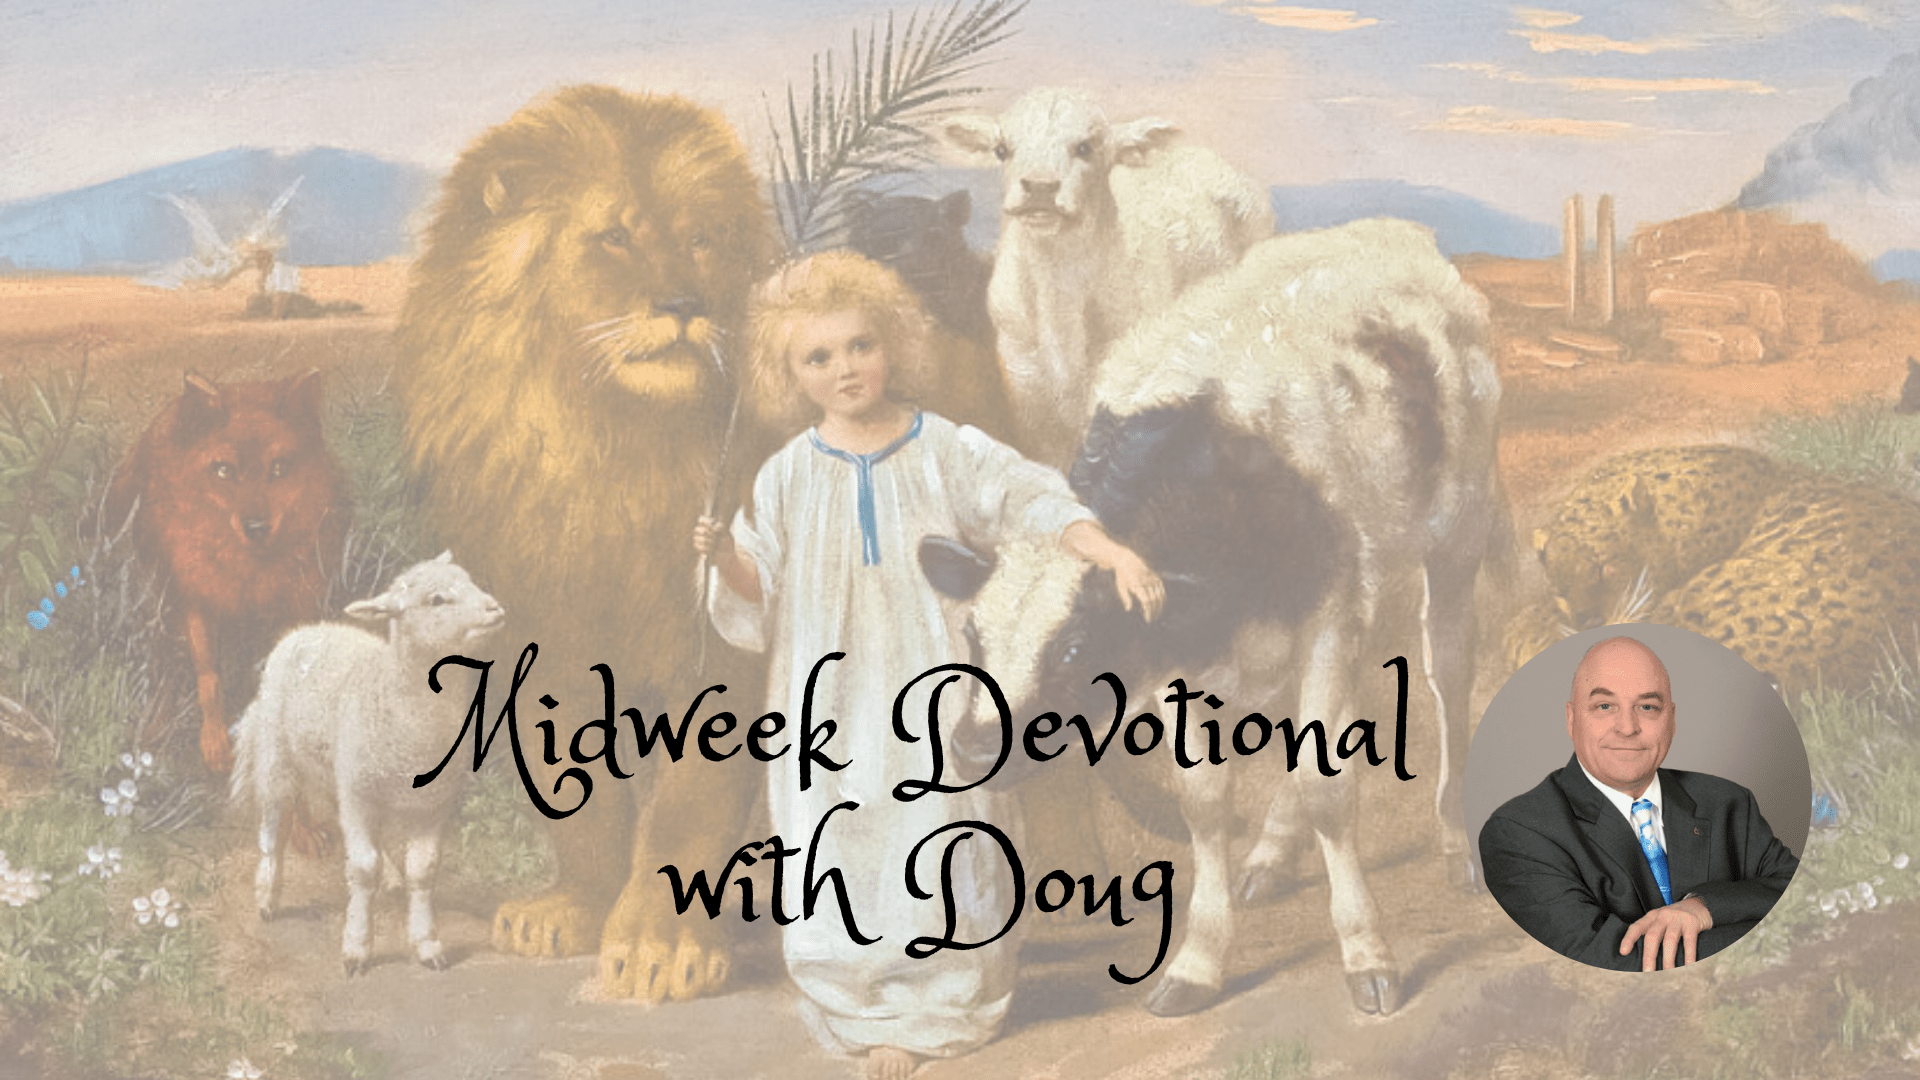 Midweek Devotional with Doug for the first week in September